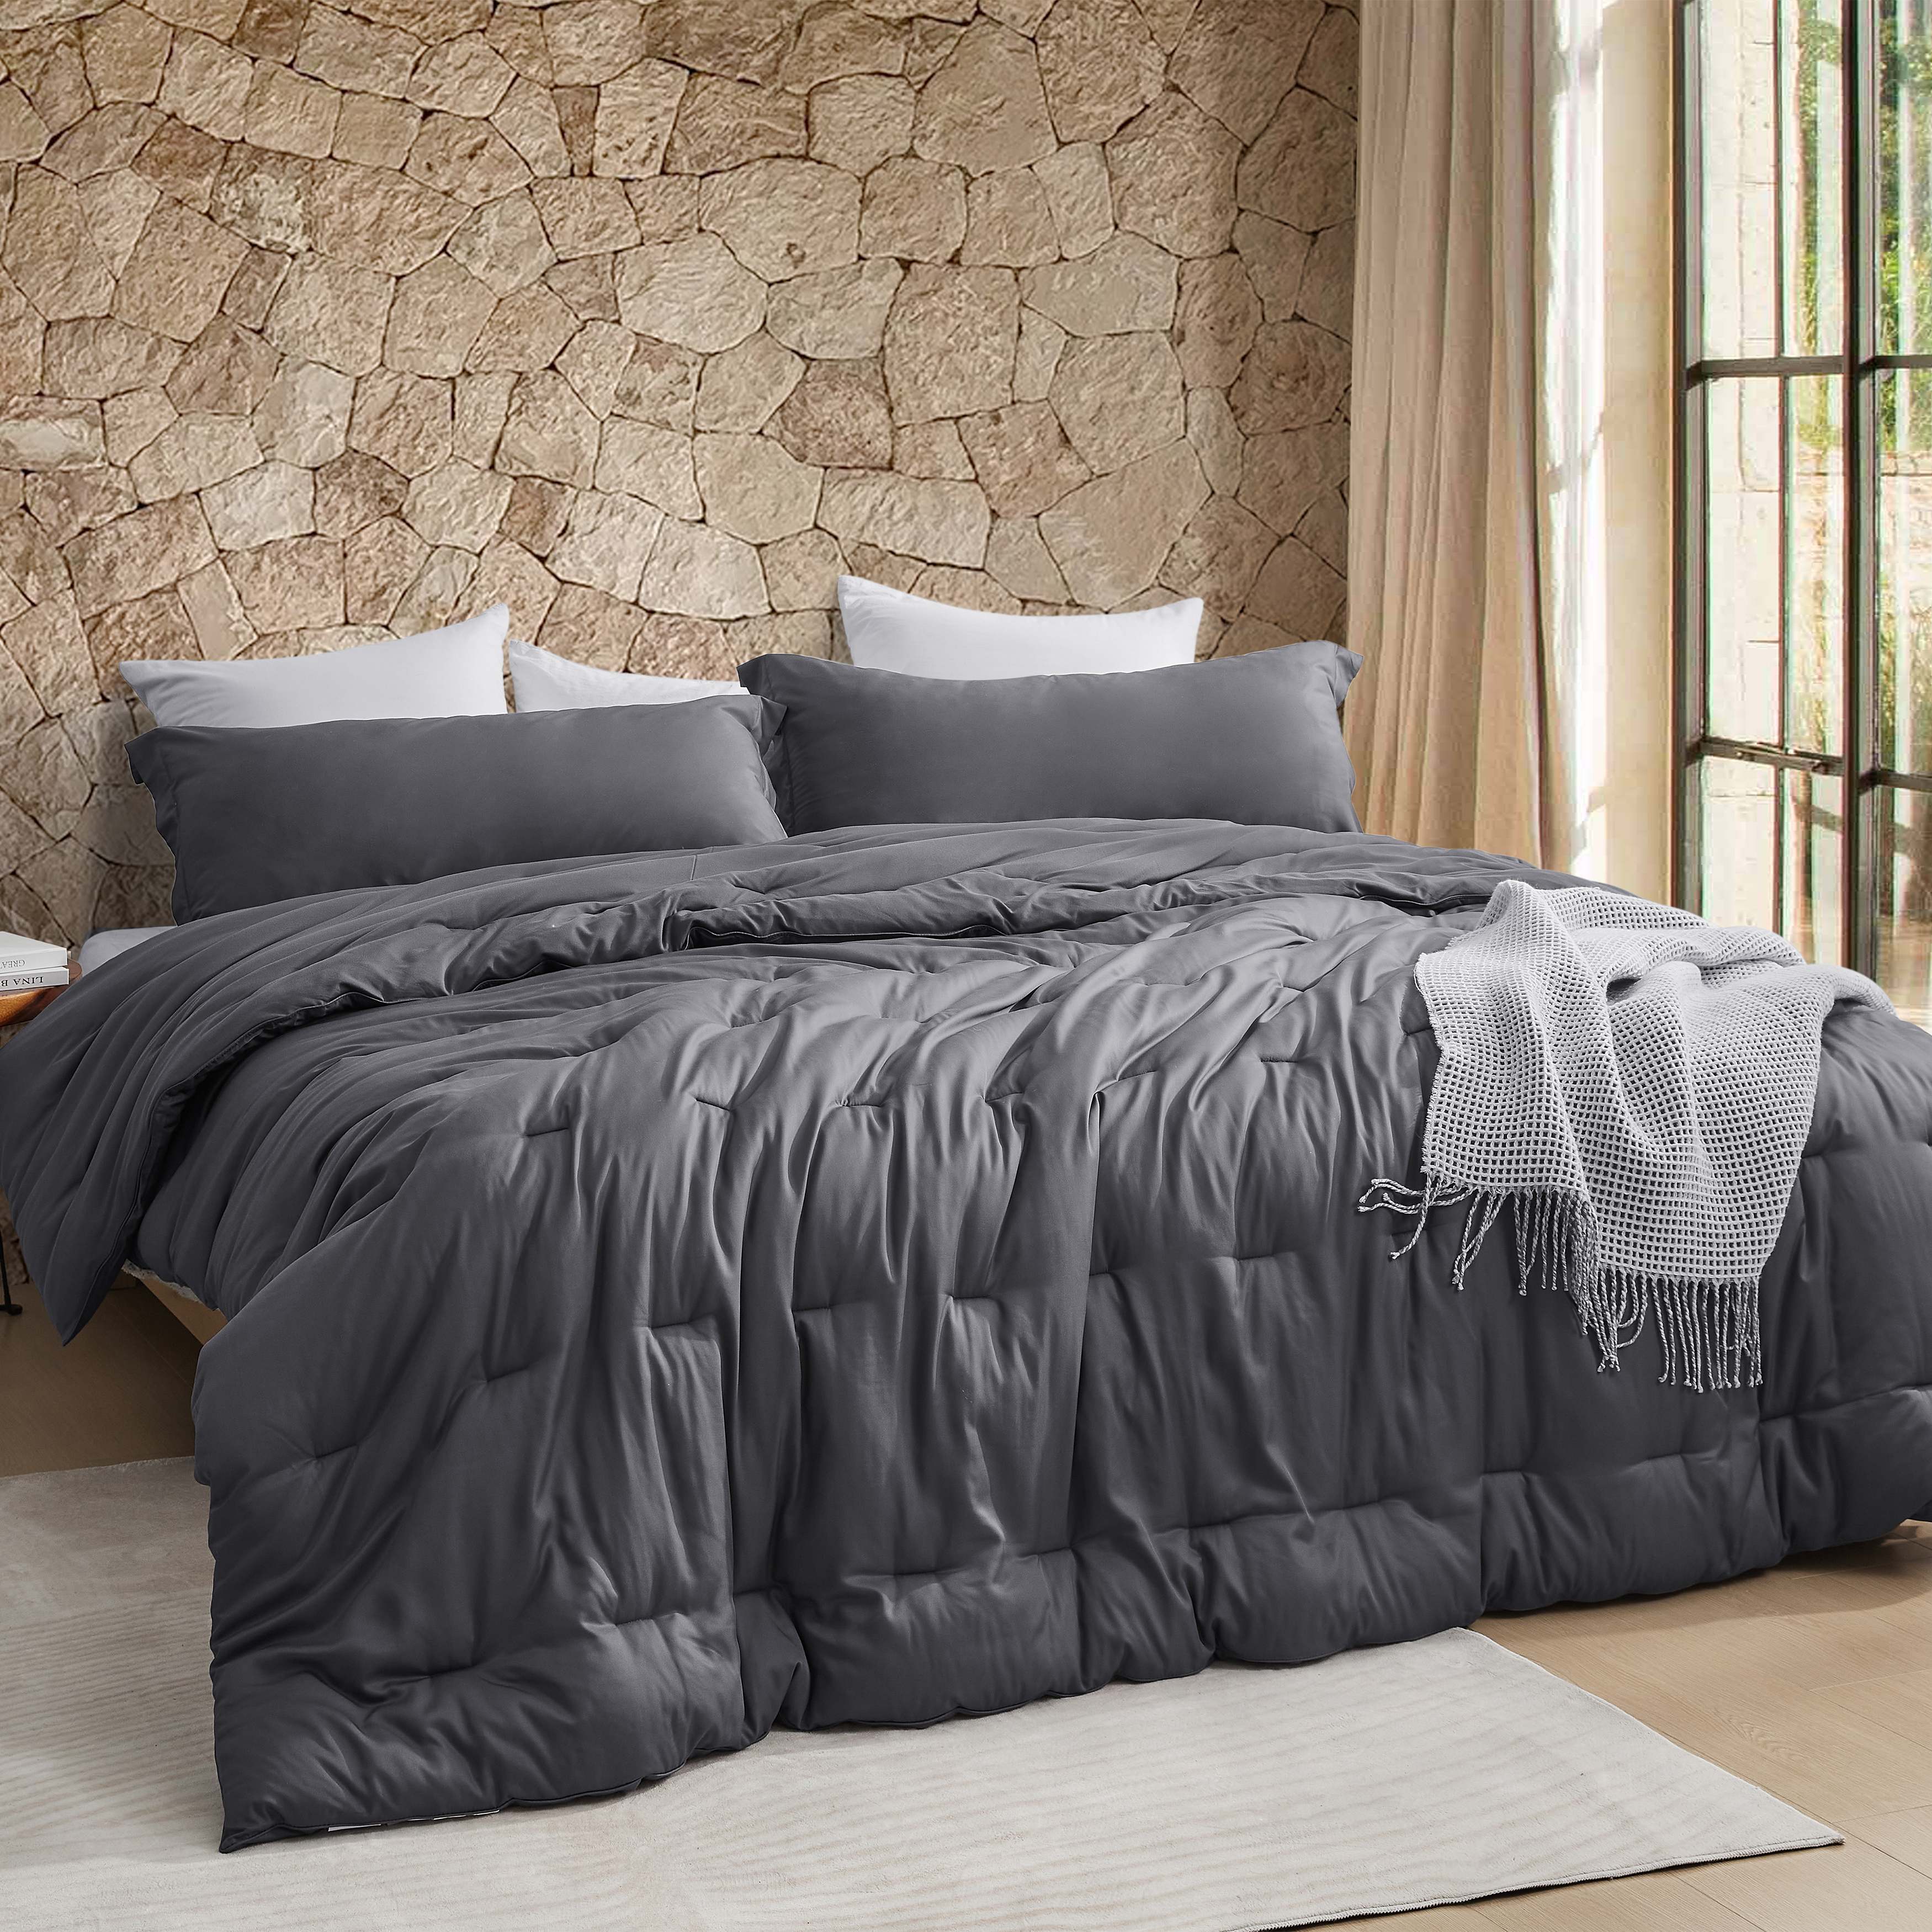 Bamboo Butter - Coma Inducer Oversized Cooling Comforter - Peppercorn Gray